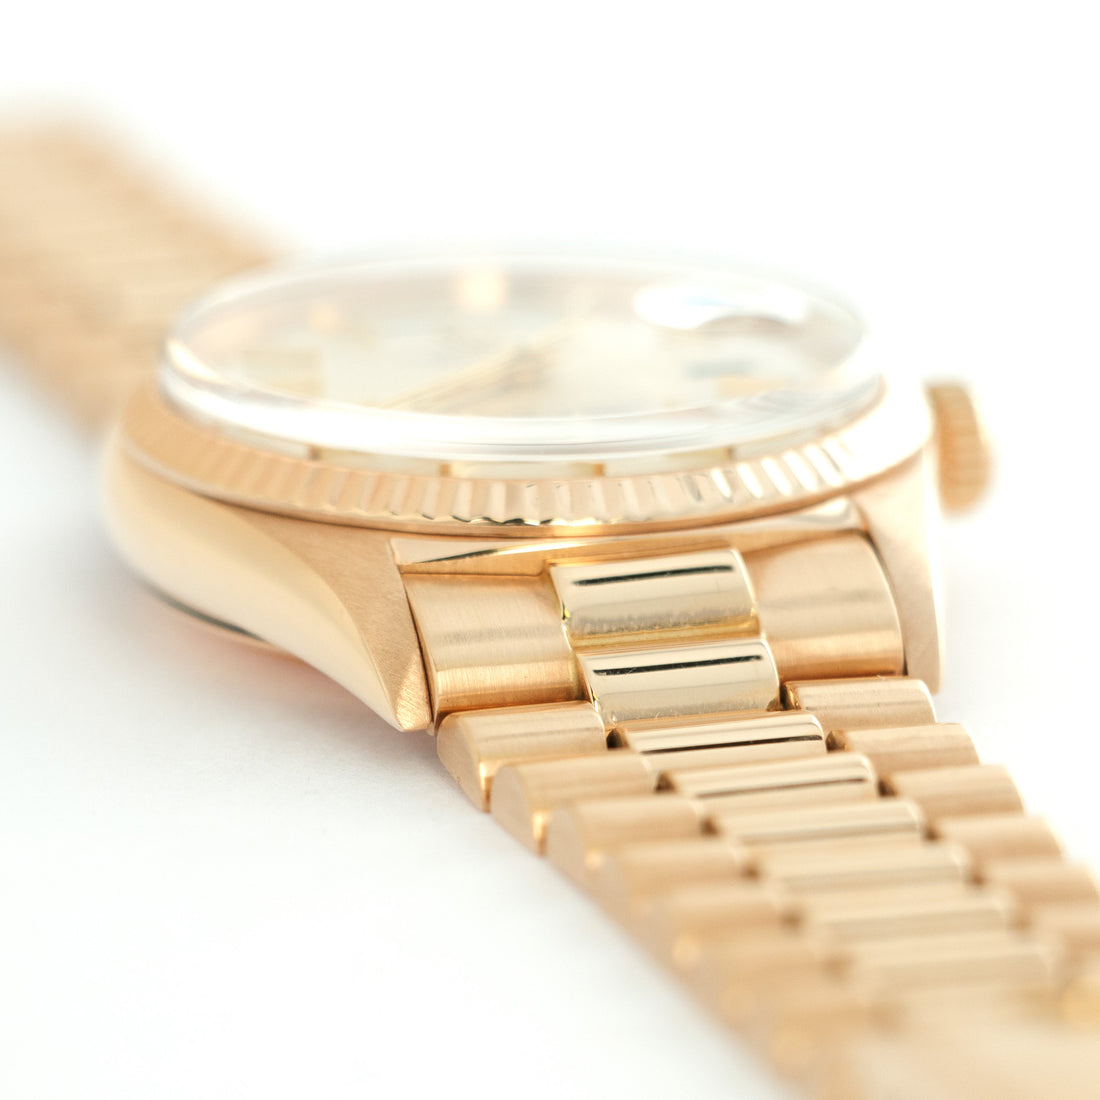 Rolex Rose Gold Day-Date Watch Ref. 1803, from 1969